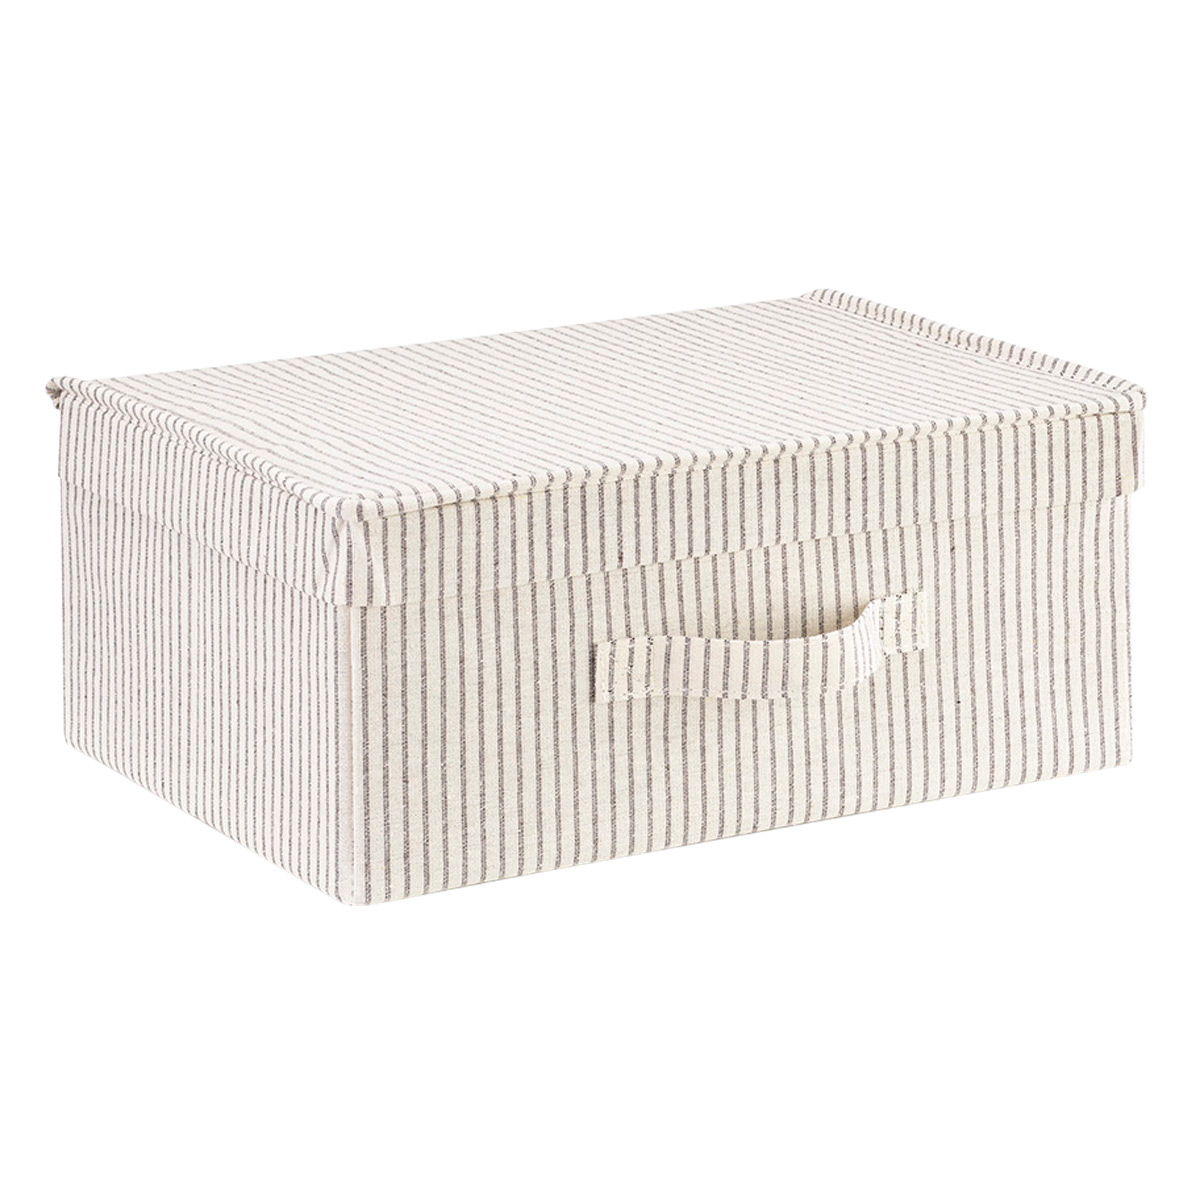 The Container Store Storage Box Grey Stripe, 15-1/8 x 11-3/8 x 6-1/2 H